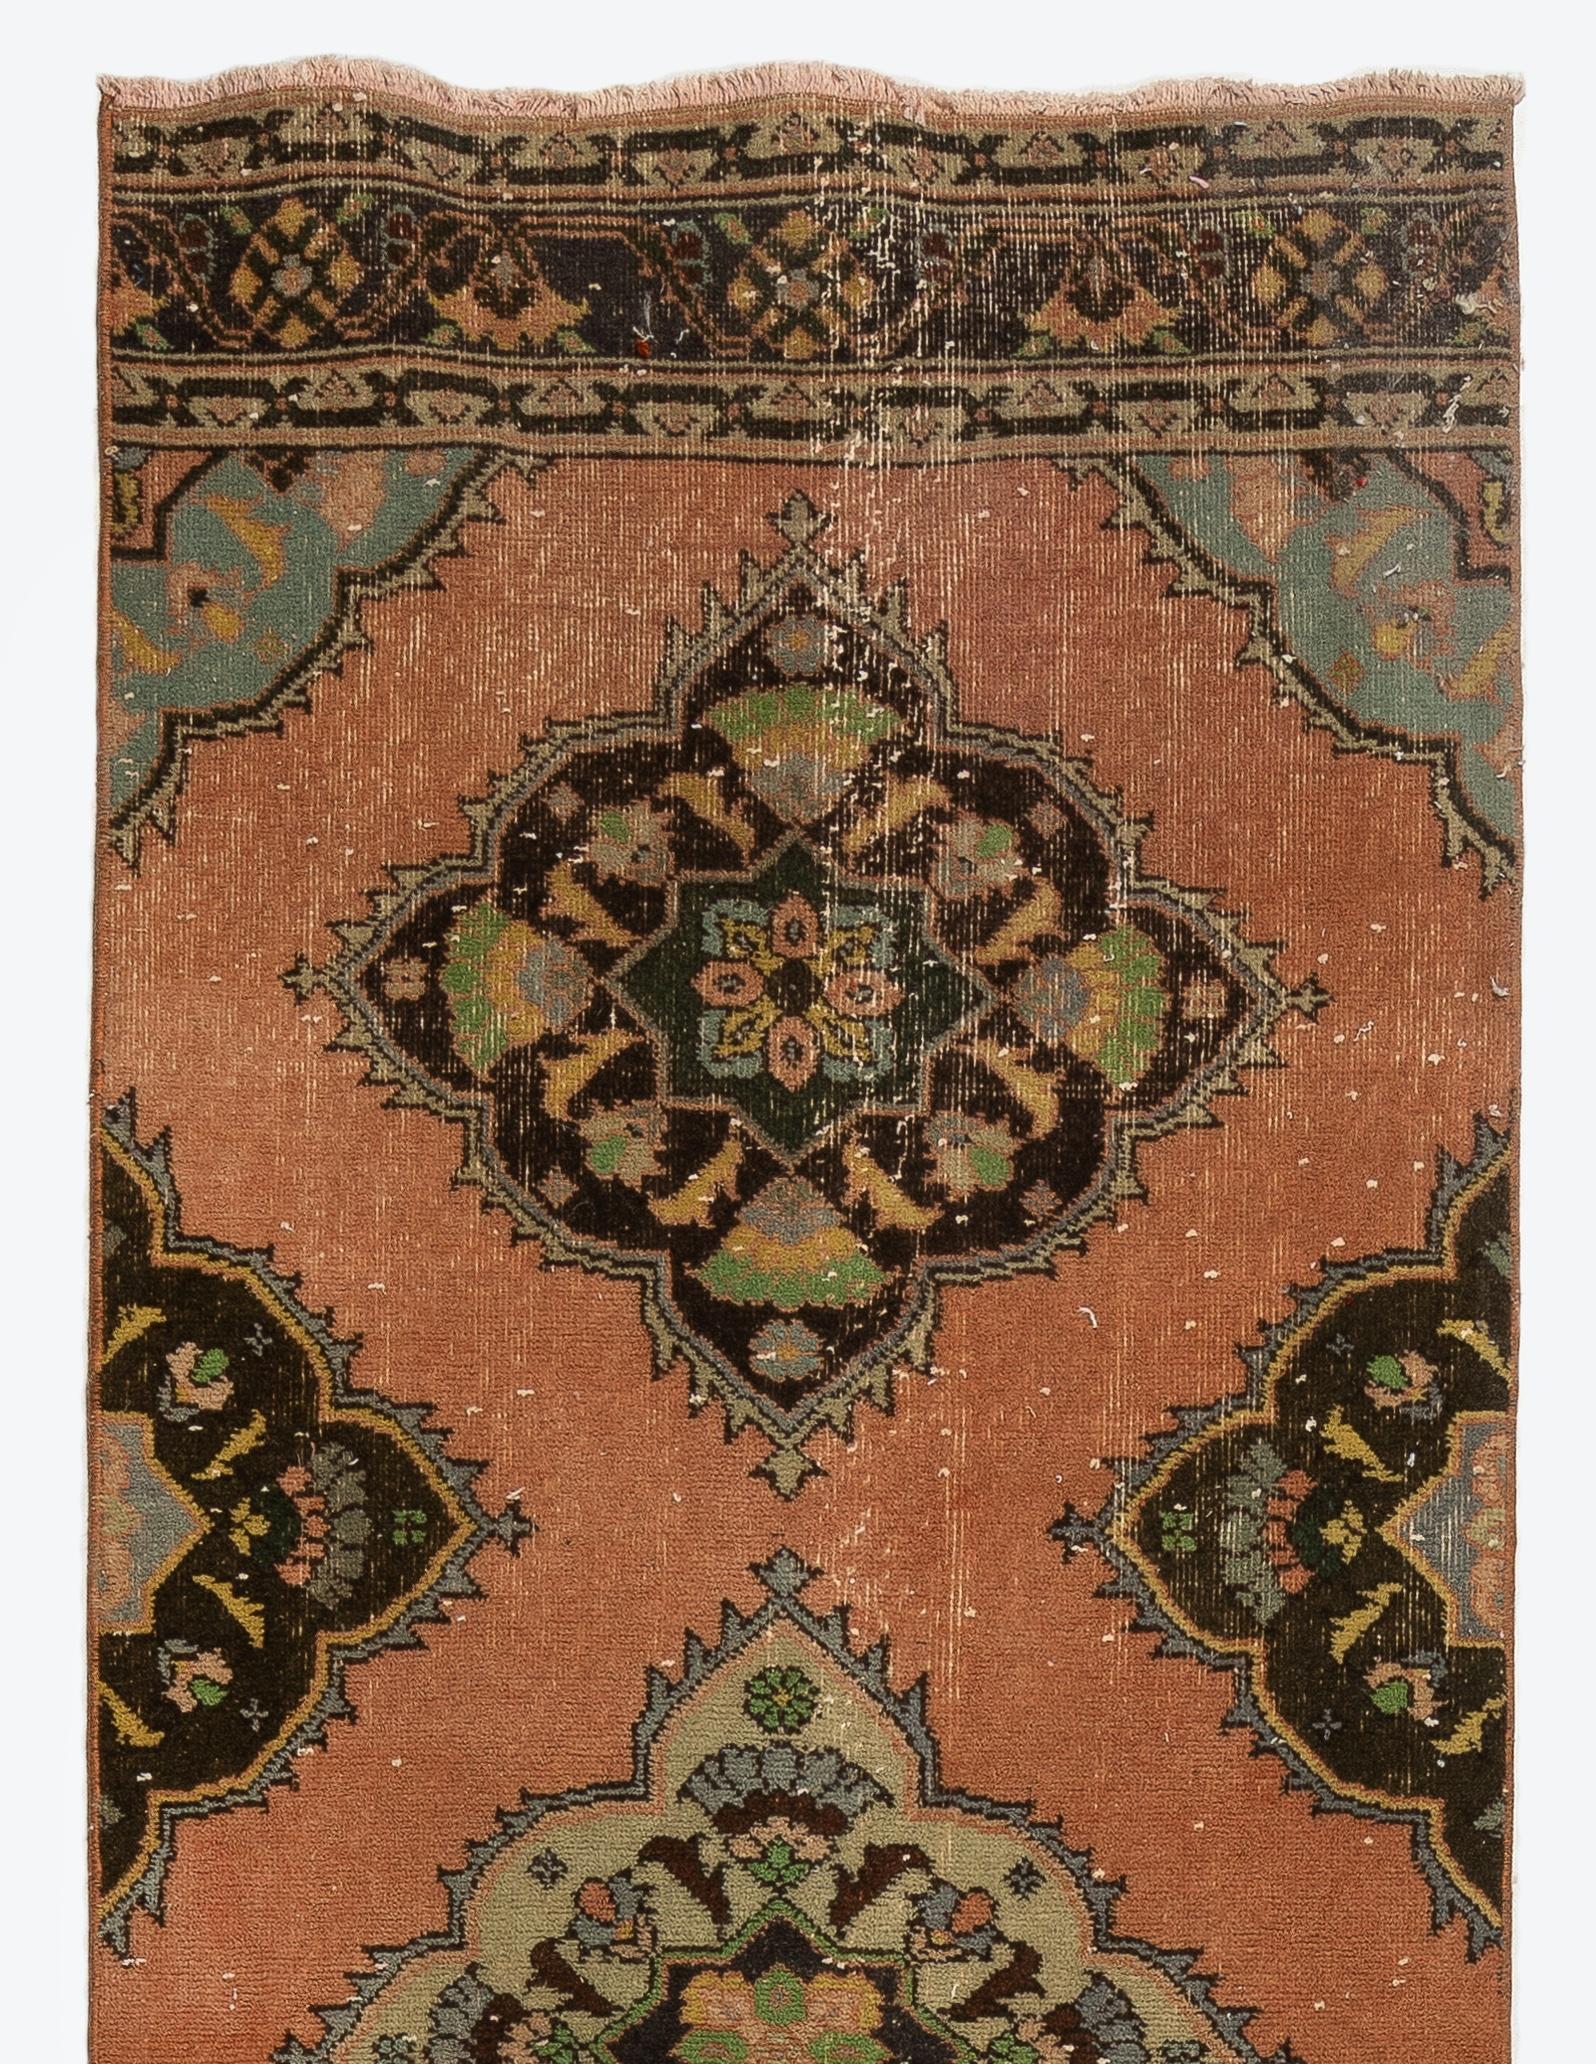 A vintage runner rug from Turkey. It is made of medium wool pile on wool foundation and features multiple full and half medallions decorated with floral motifs in brown, light green, salmon pink and slate blue against a rust-colored field.
It has